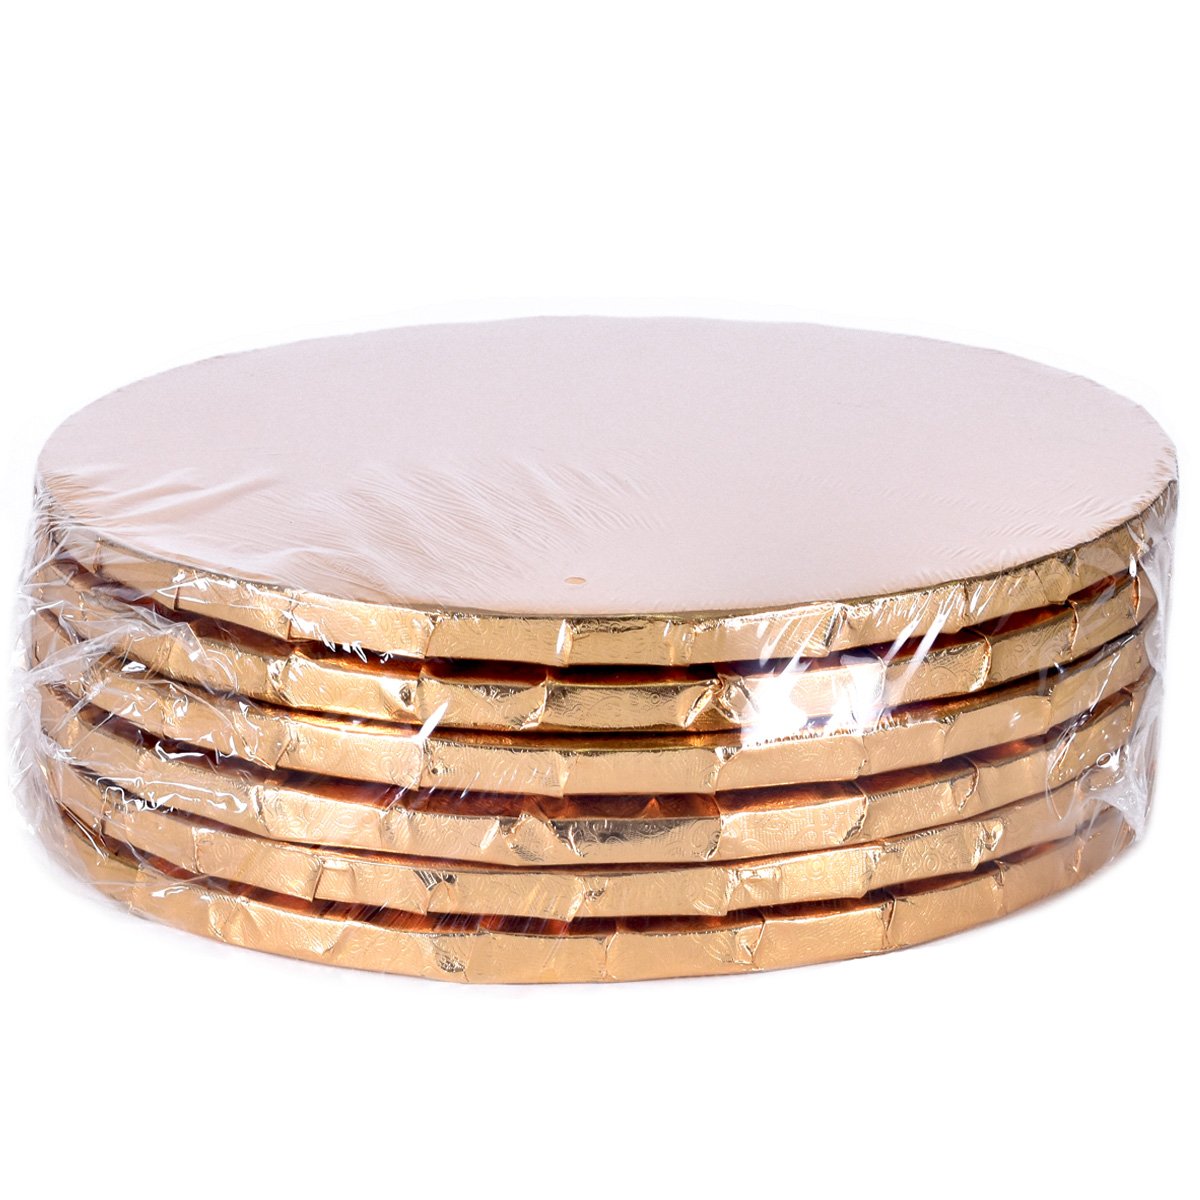 Gold Circle Cake Drums — All Sizes